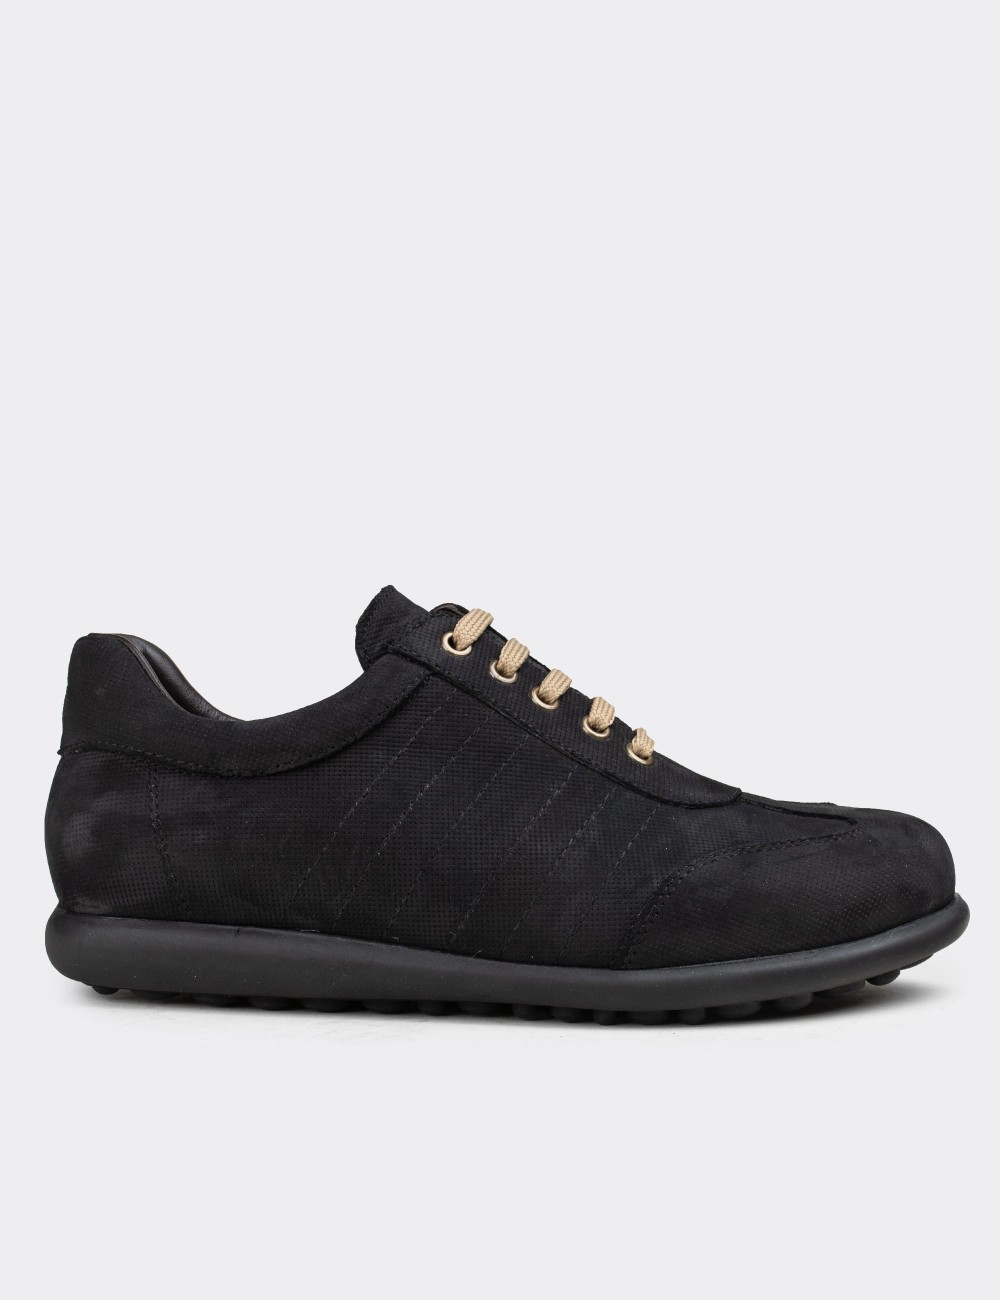 Navy Nubuck Leather Lace-up Shoes - 01826MLCVC04